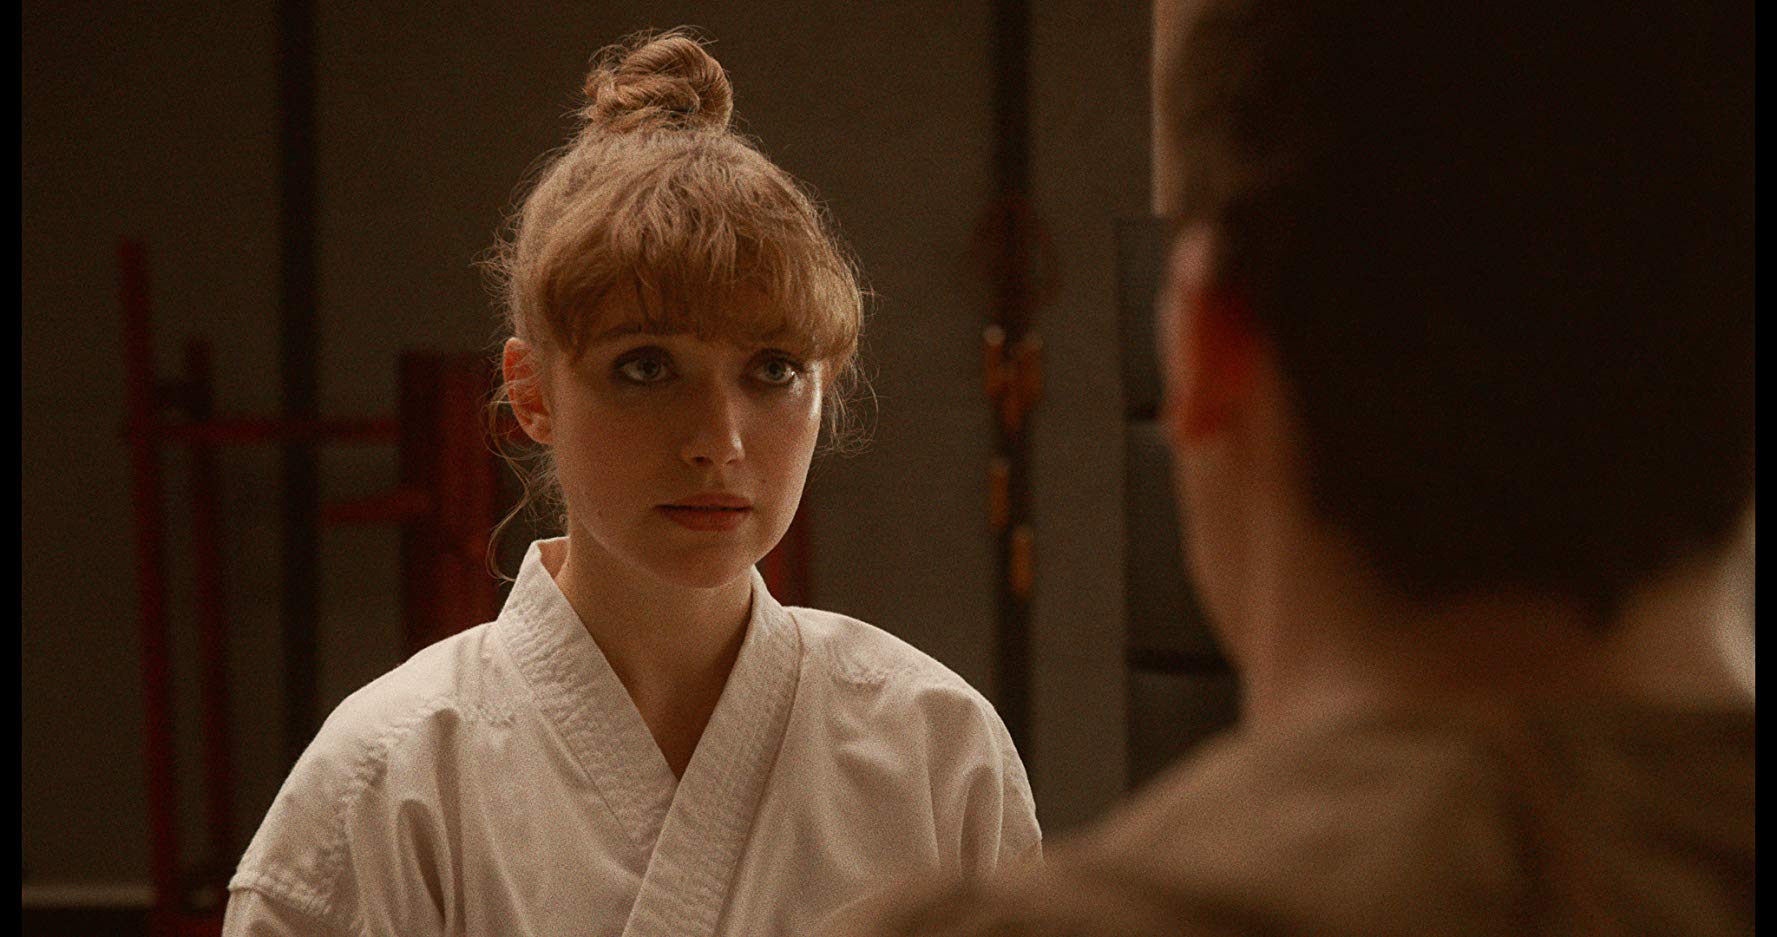 The Art Of Self-Defense Fight Choreographer Mindy Kelly On Prepping The Actors For Martial Arts